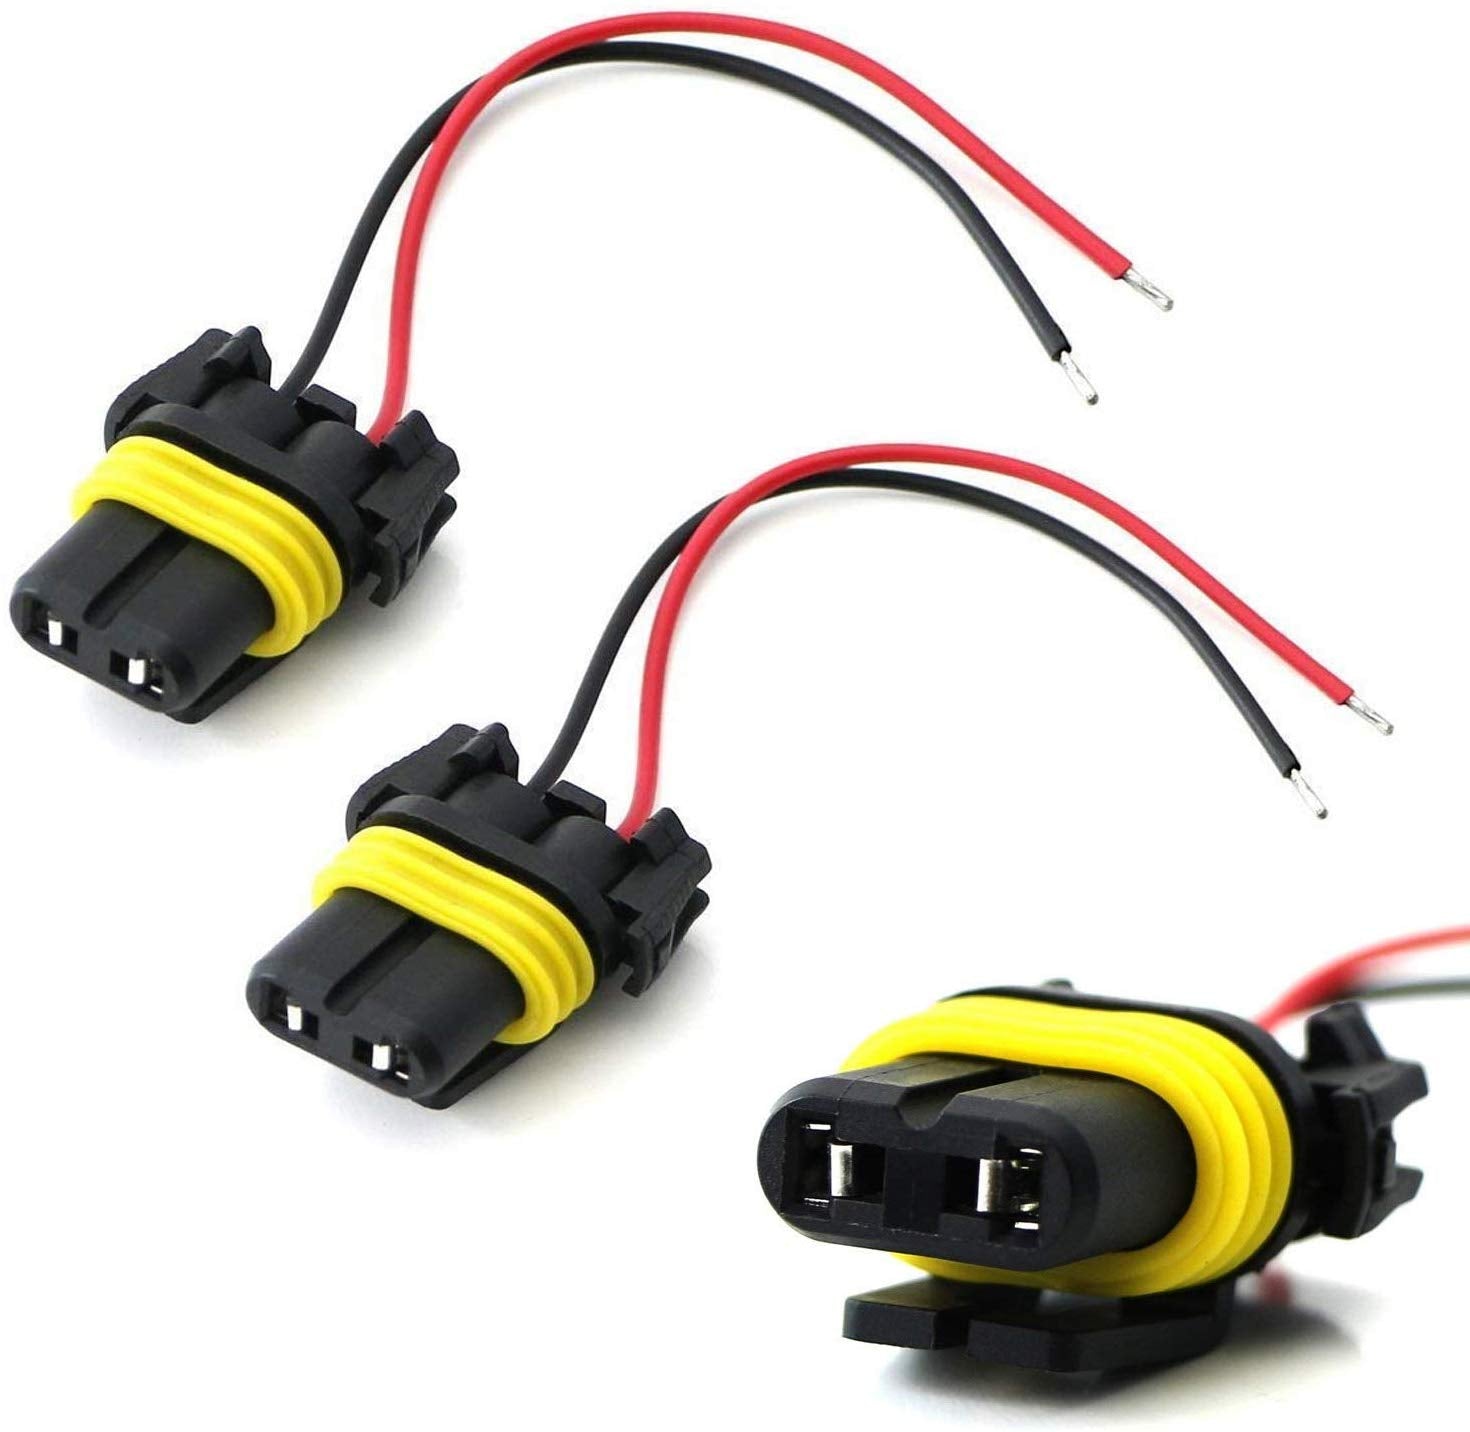 iJDMTOY (2) 9006 9012 HB4 Female Adapter Wiring Harness Sockets w/ 4-Inch Wires For Headlights Fog Lights Repair or Retrofit